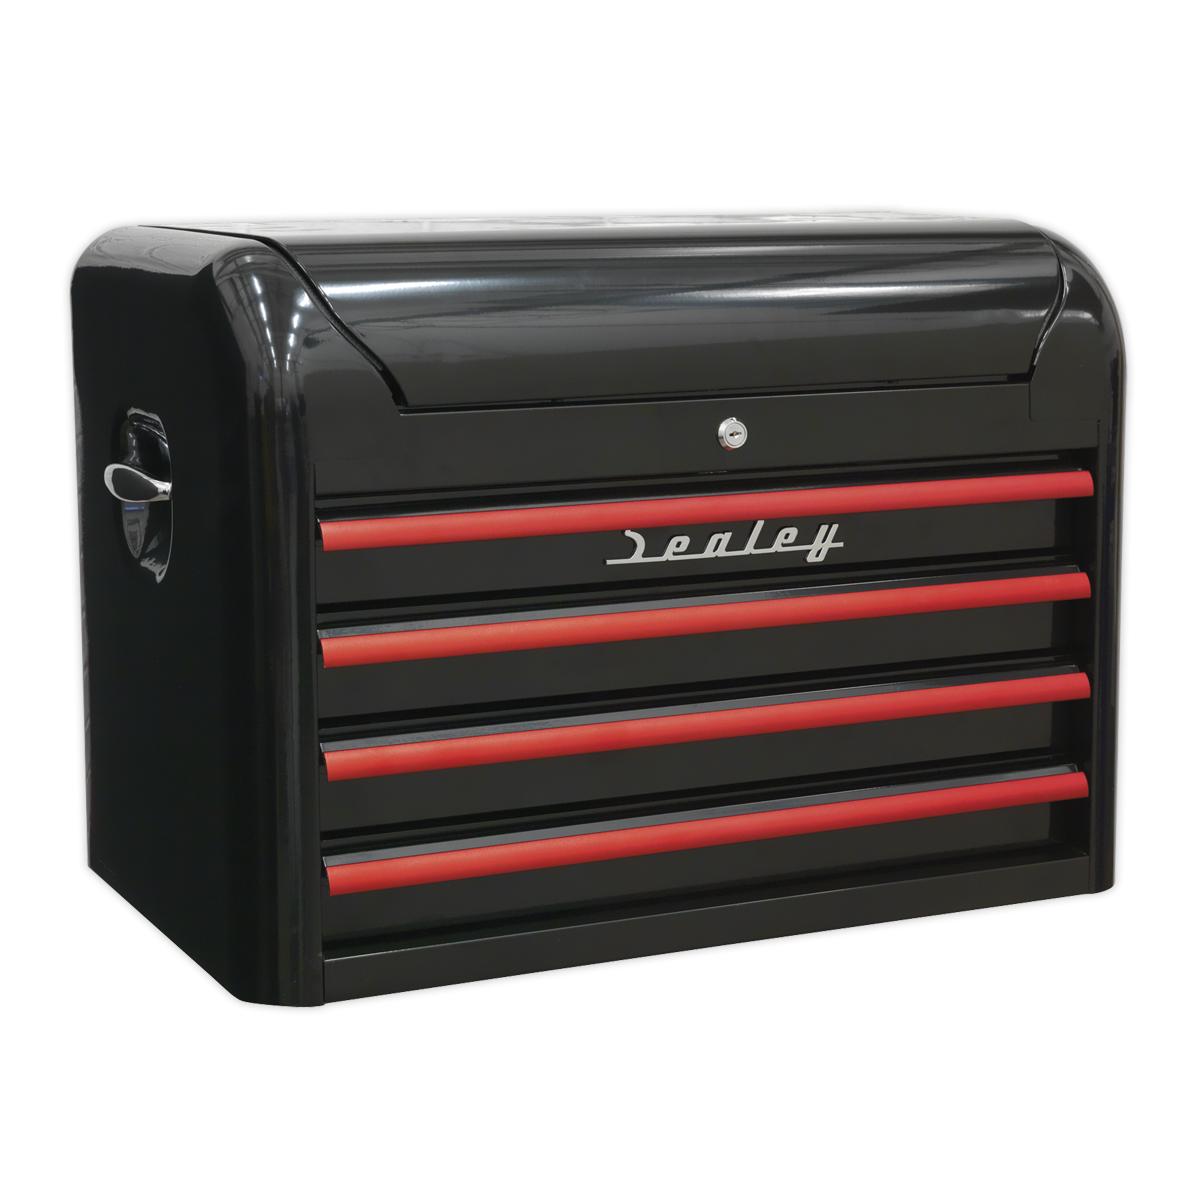 Sealey Topchest 4 Drawer Retro Style - Black with Red Anodised Drawer Pulls AP28104BR